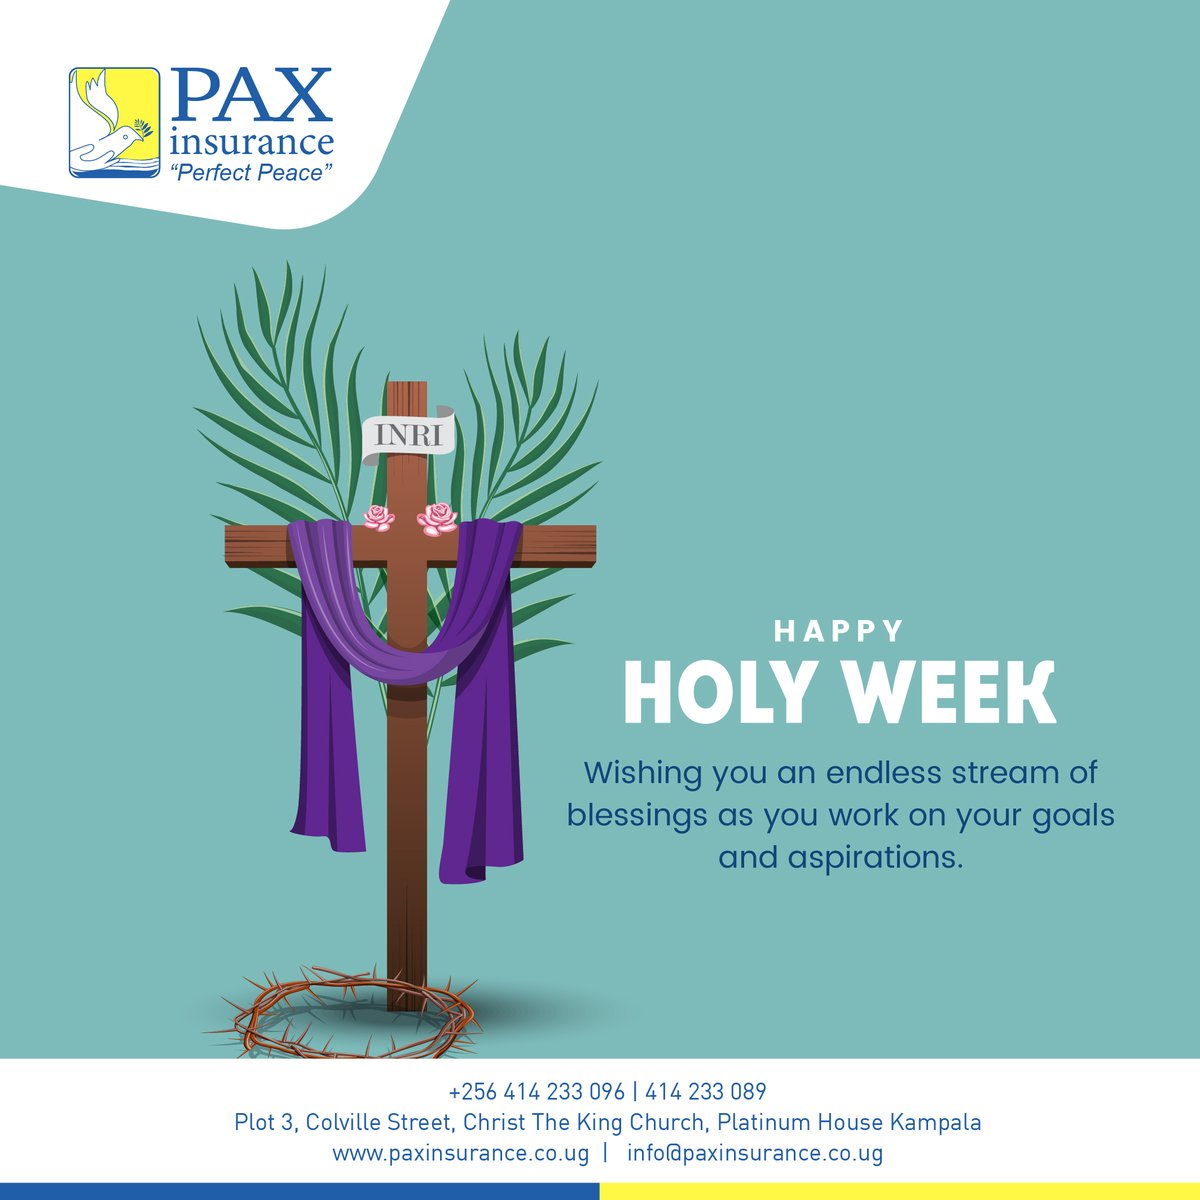 Sending warm wishes for a meaningful and spiritually enriching Holy Week to all. May it be a time of grace and transformation. 🕊️

#HolyWeek #Easterseason #Easterholidays